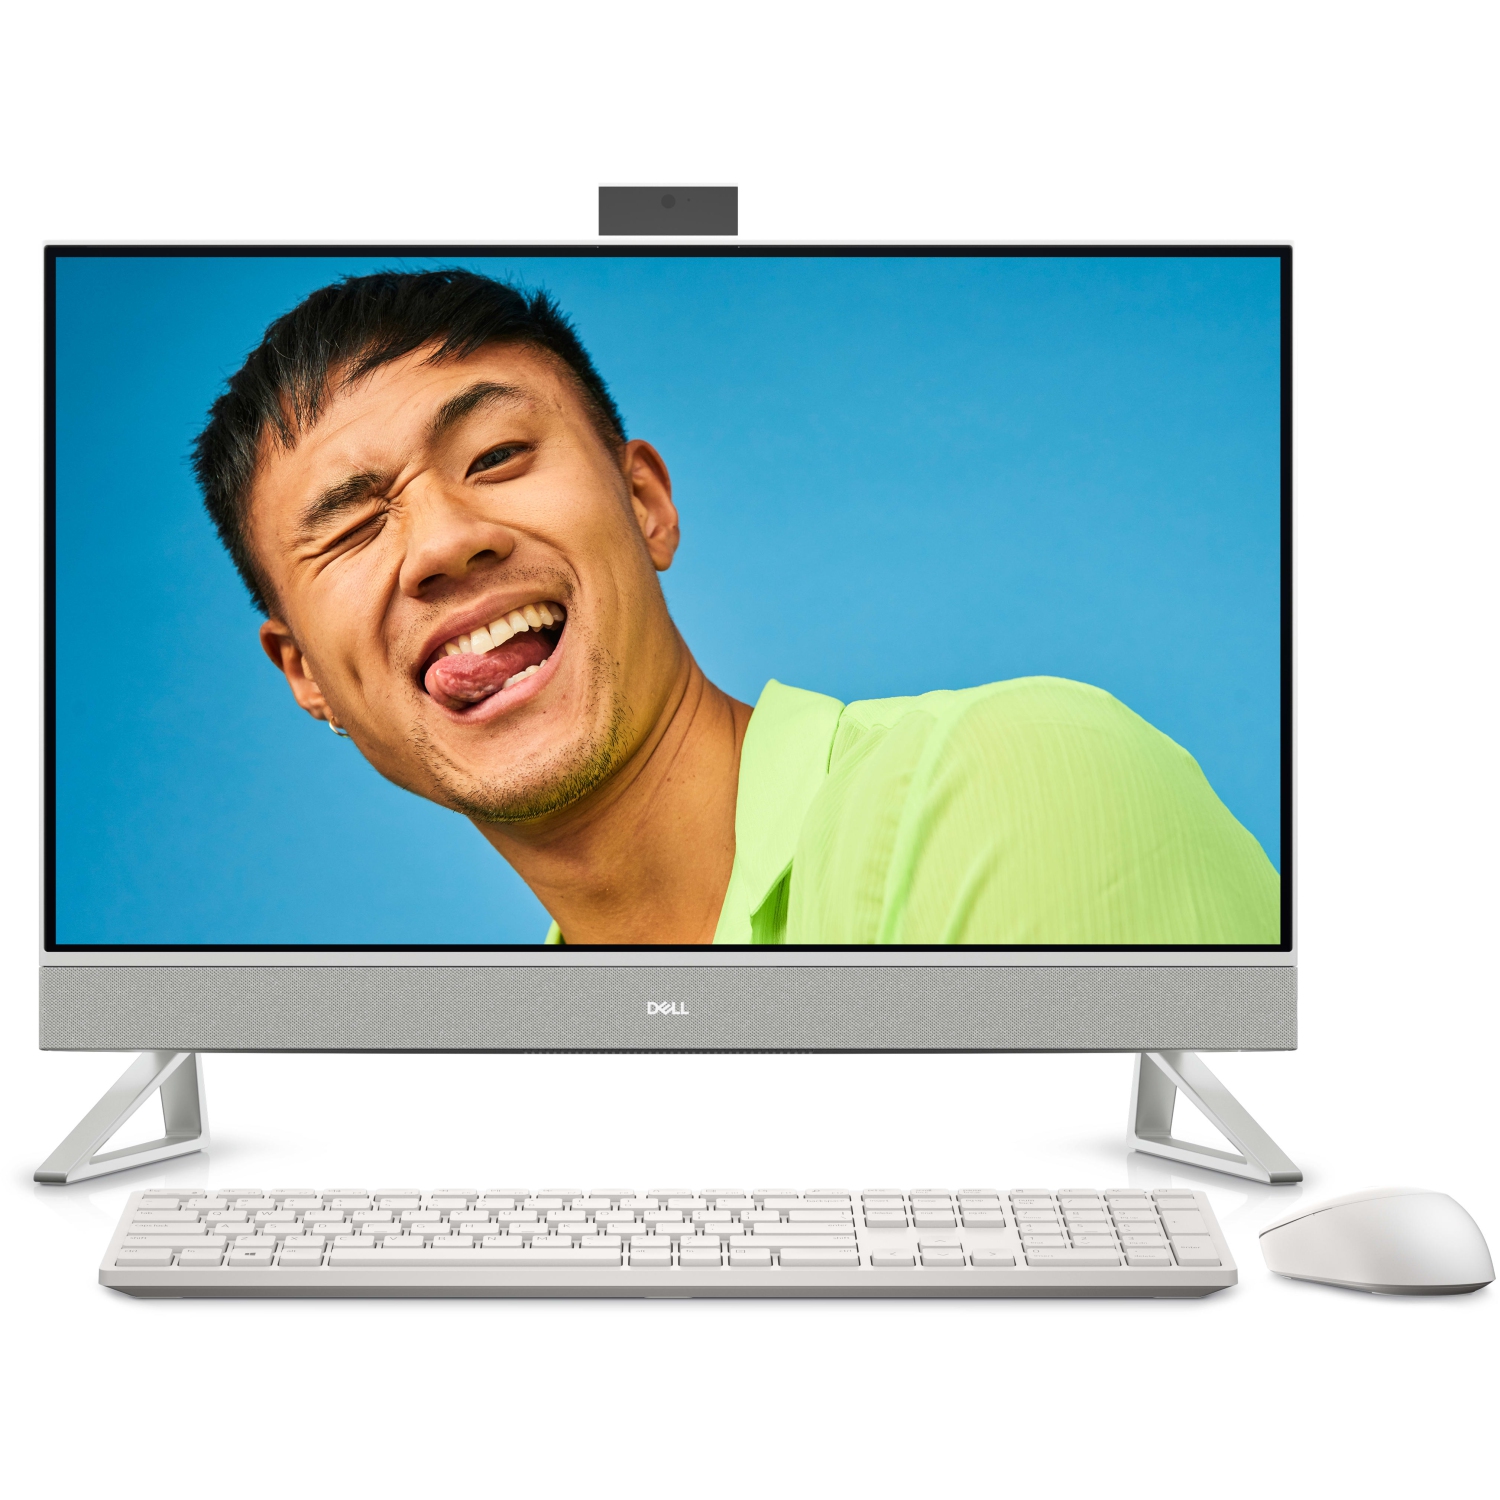 Refurbished (Excellent) – Dell Inspiron 7710 AIO (2022) | 27" FHD Touch | Core i7 - 4TB SSD + 1TB HDD - 64GB RAM - GeForce MX550 | 10 Cores @ 4.7 GHz - 12th Gen CPU